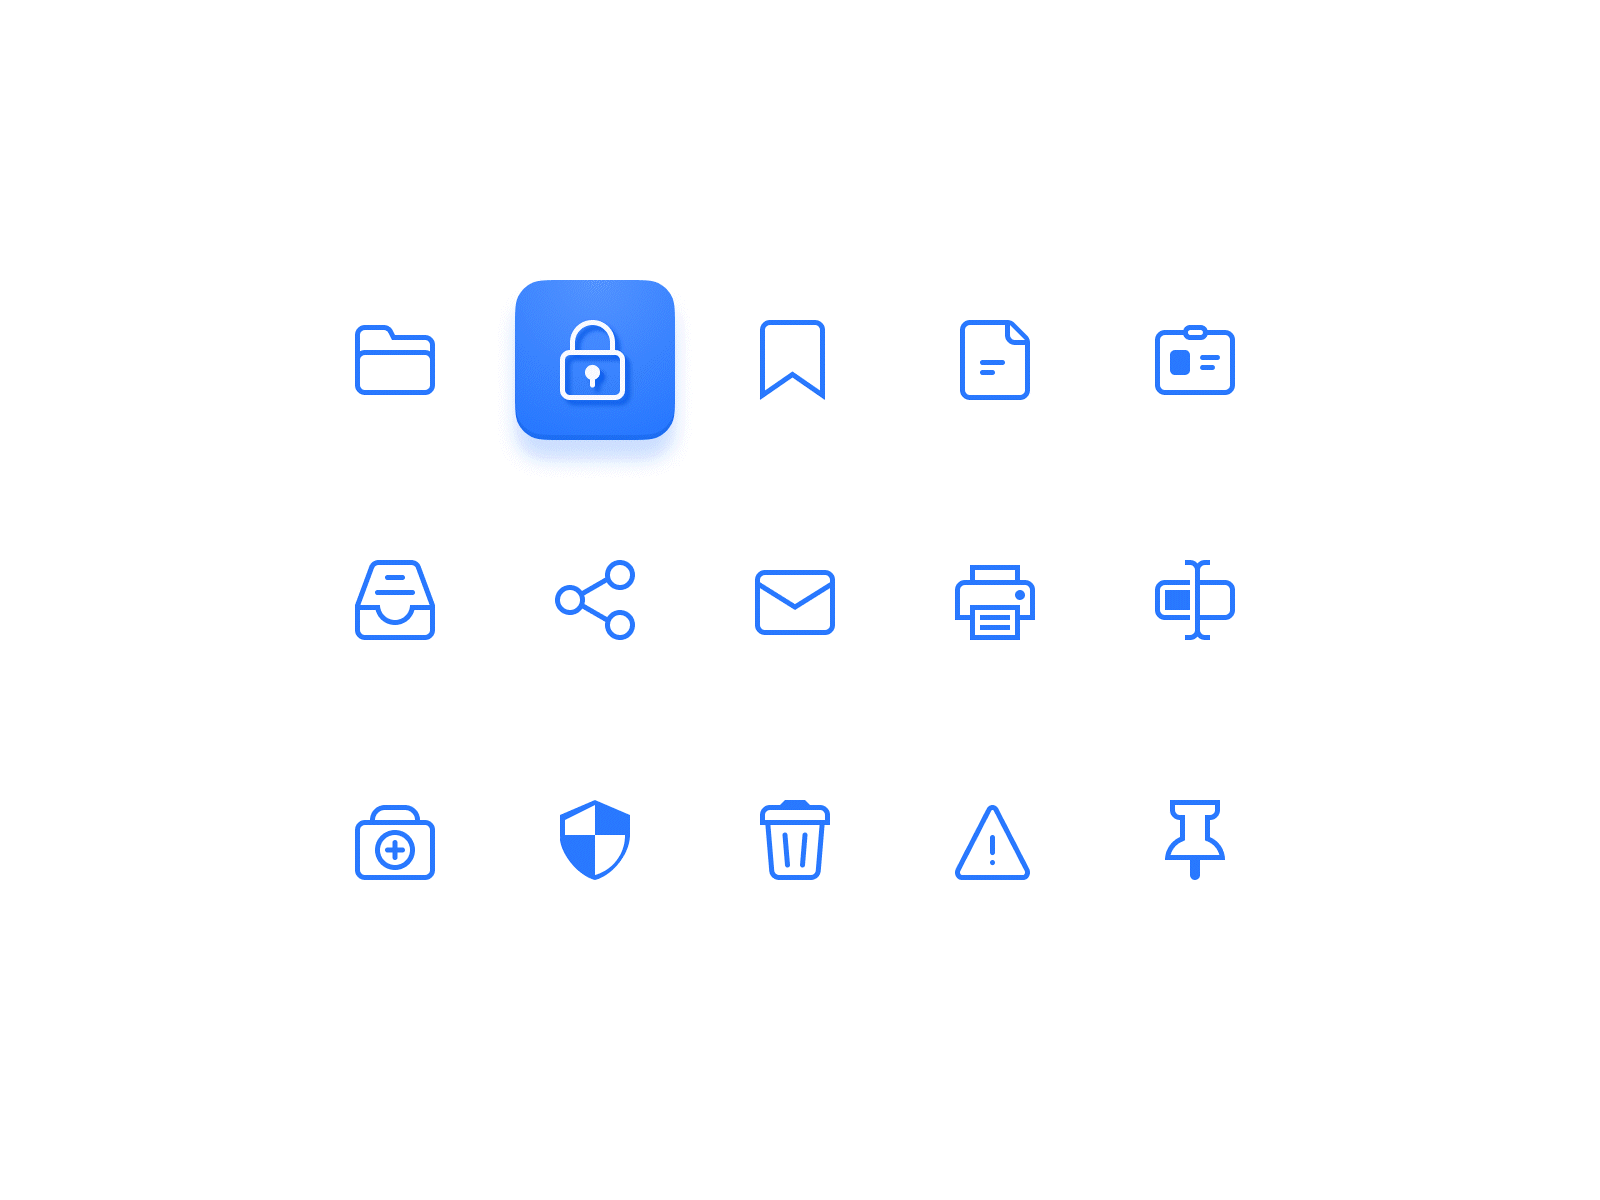 Password Manager icons